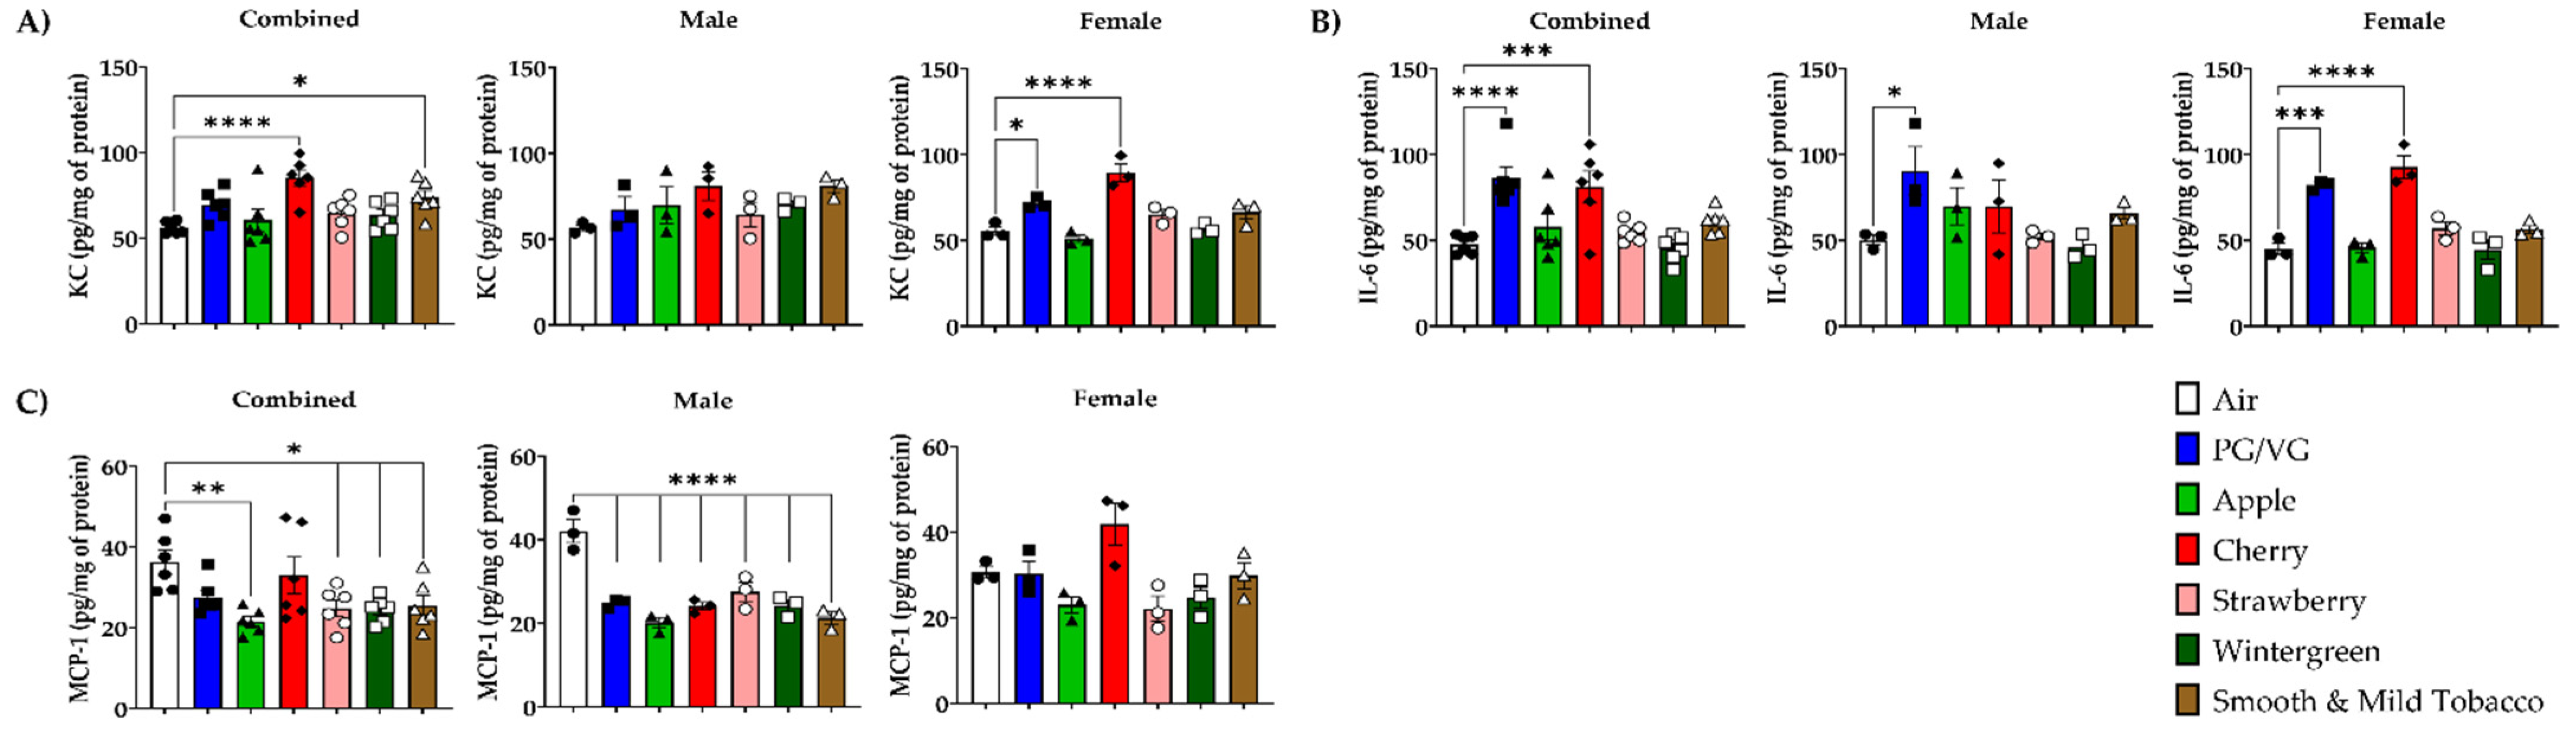 Toxics | Free Full-Text | Nose-Only Exposure to Cherry- and  Tobacco-Flavored E-Cigarettes Induced Lung Inflammation in Mice in a  Sex-Dependent Manner